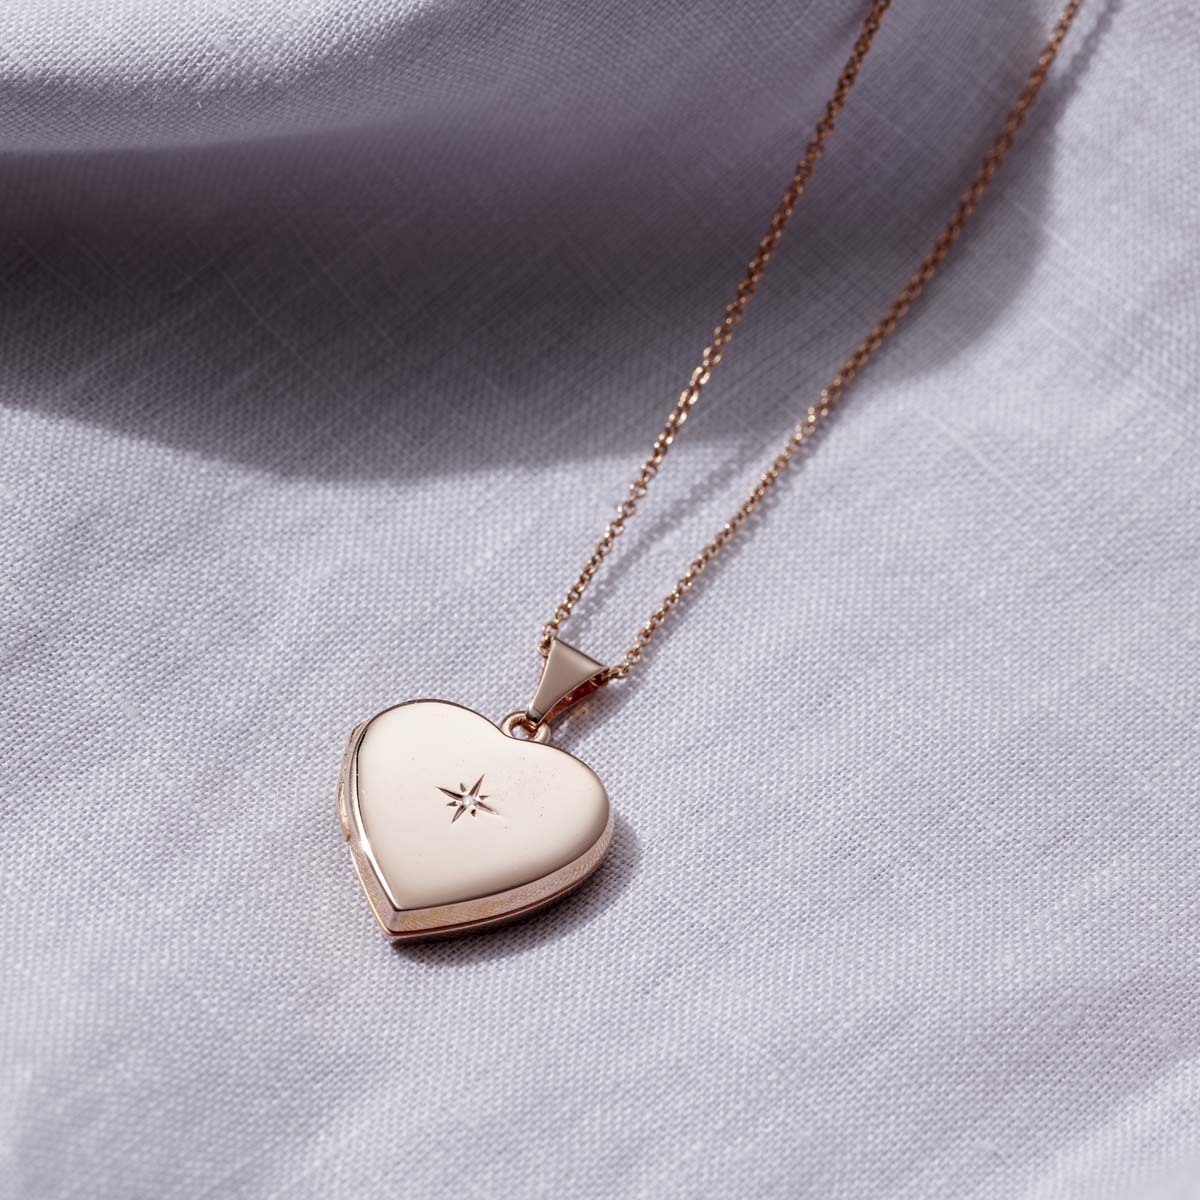 Posh Totty Designs 18ct Gold Plate Heart Locket with Diamond